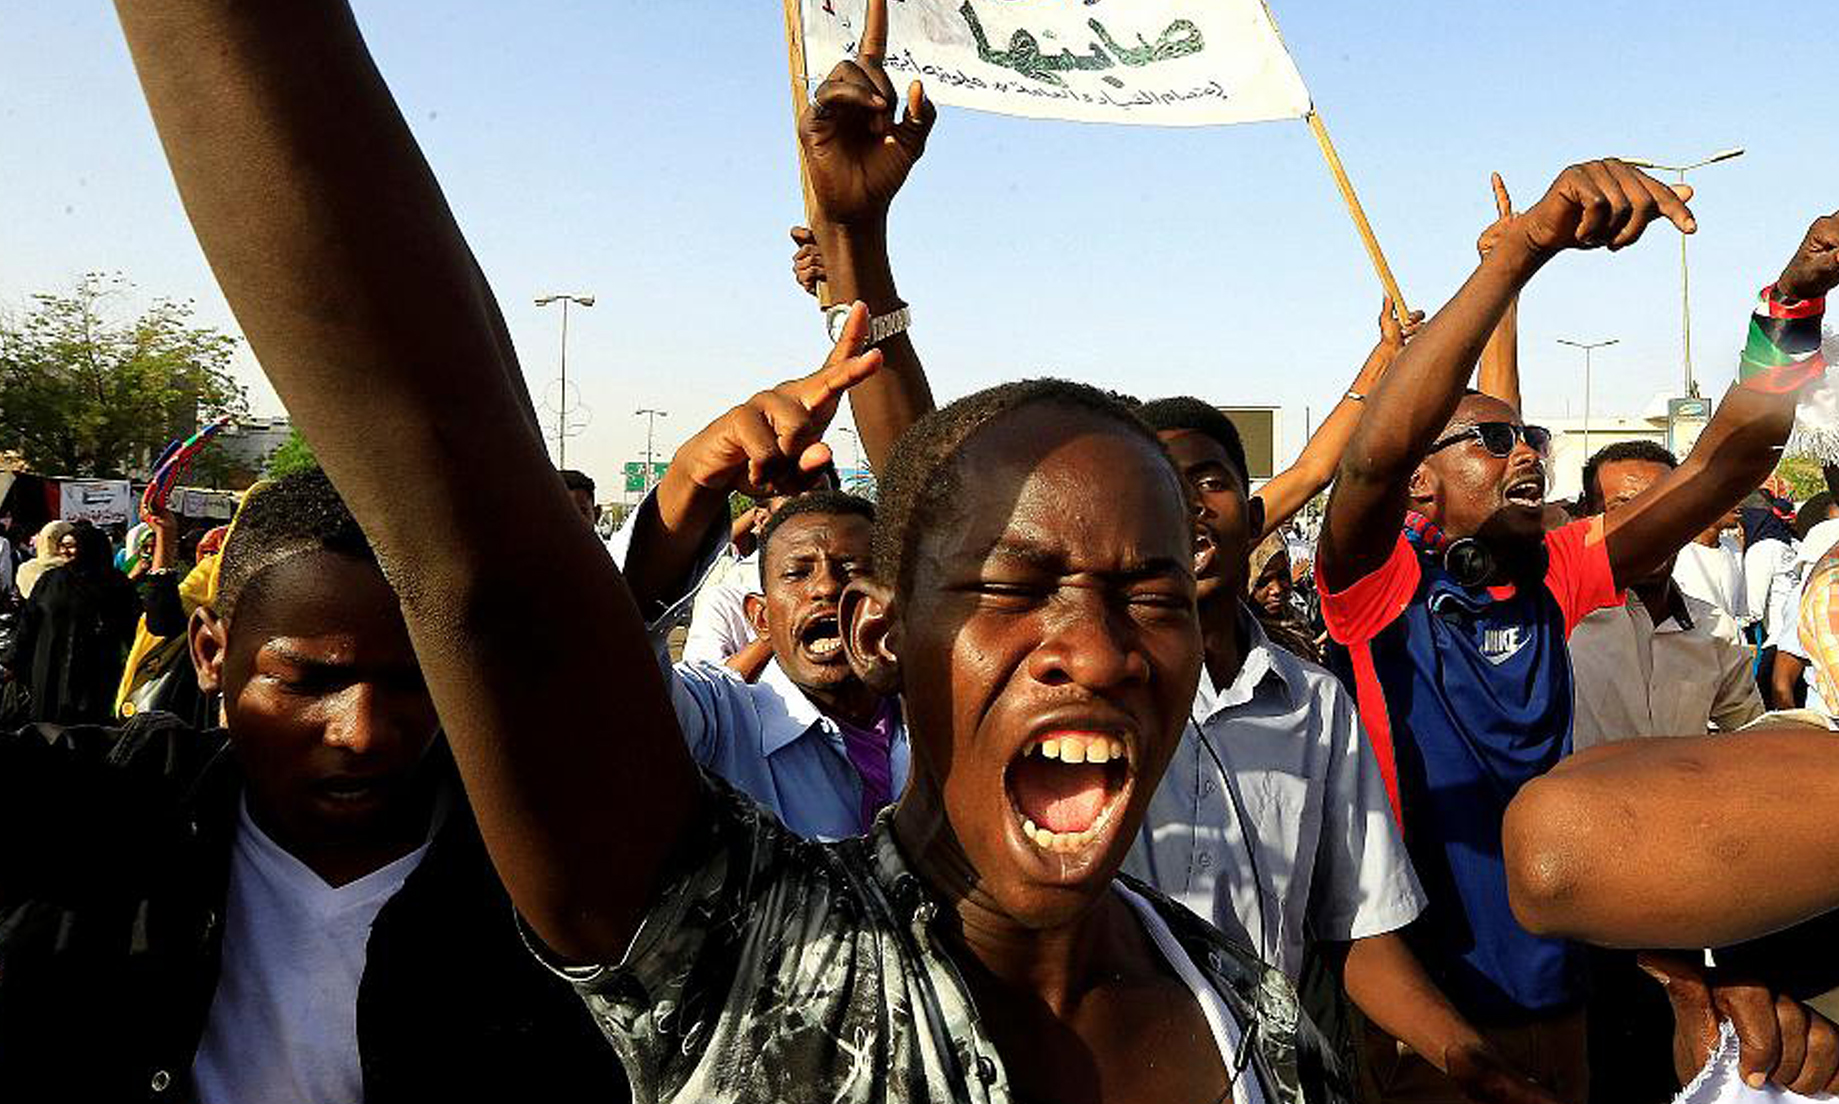 Clashes in Sudan after deal on power structure